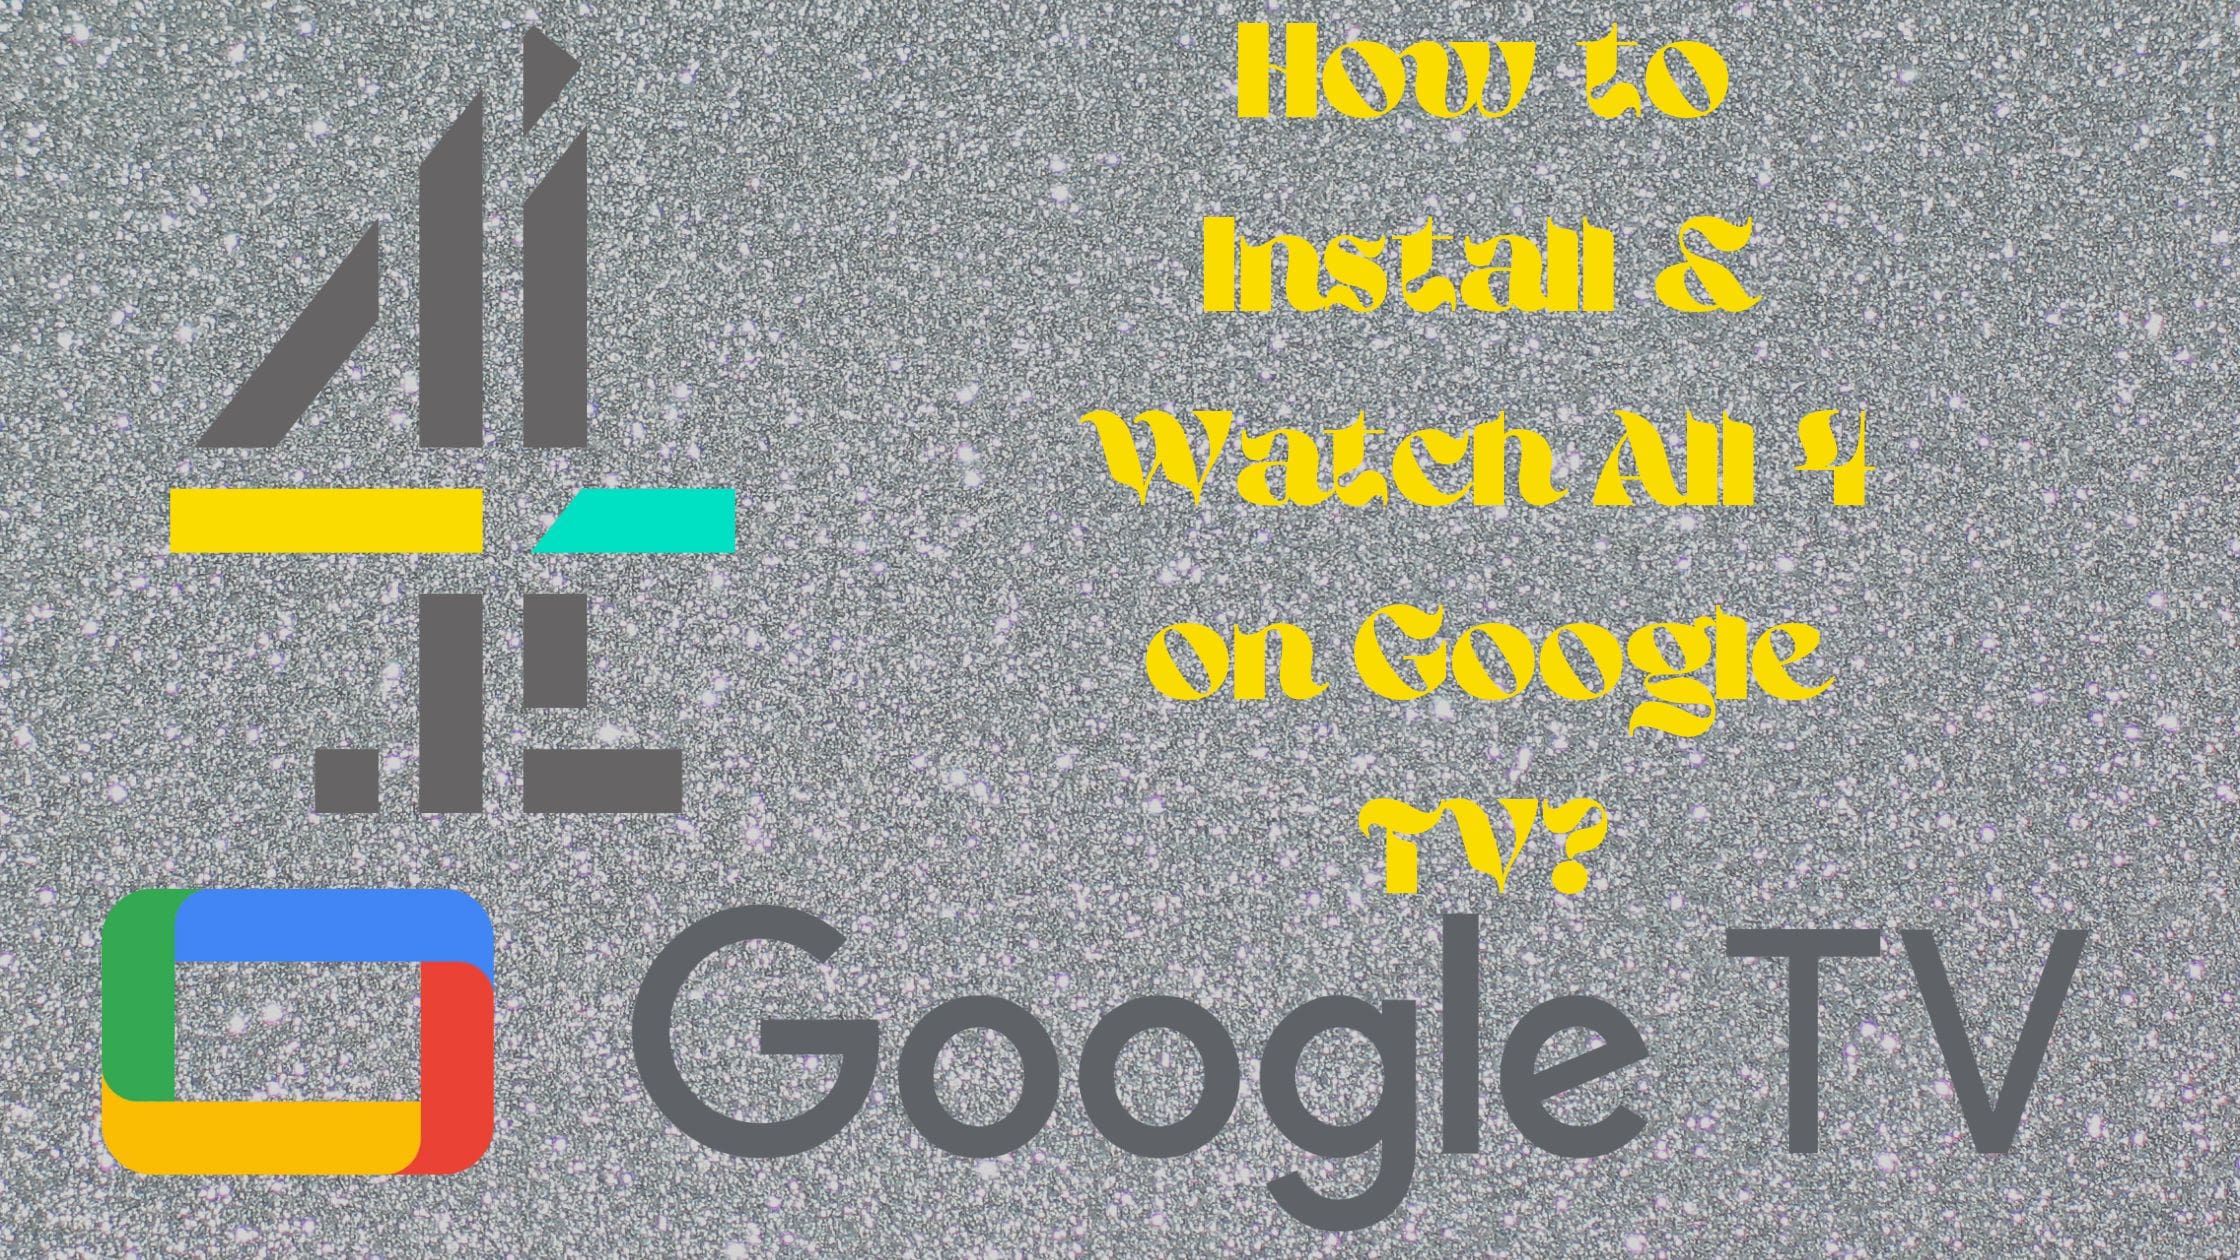 How to Install & Watch All 4 on Google TV?